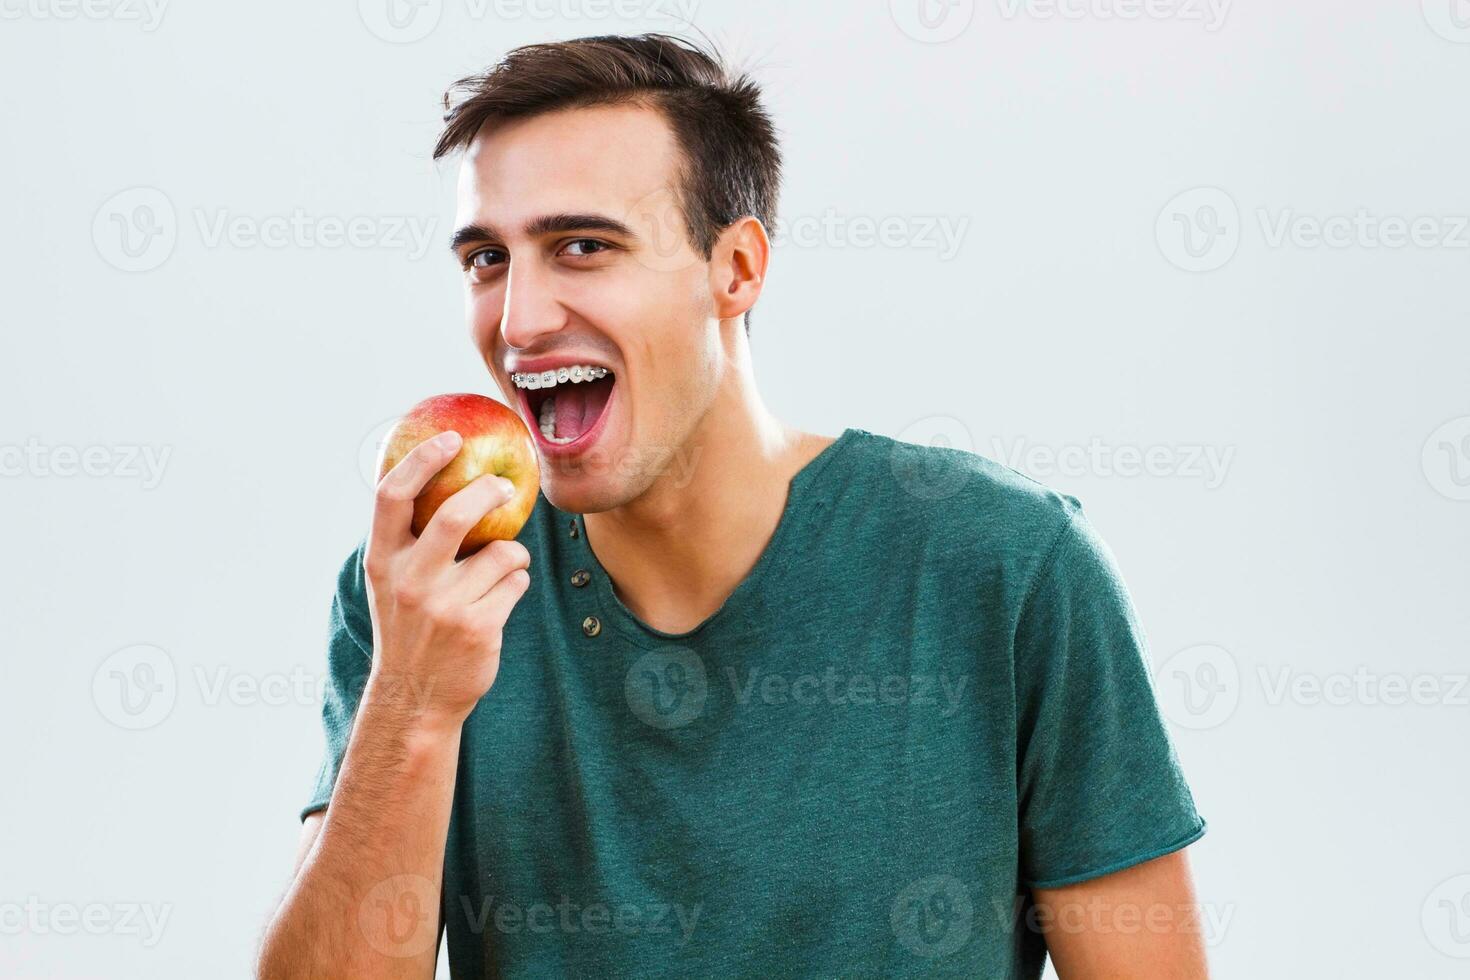 Man with braces eating apple photo